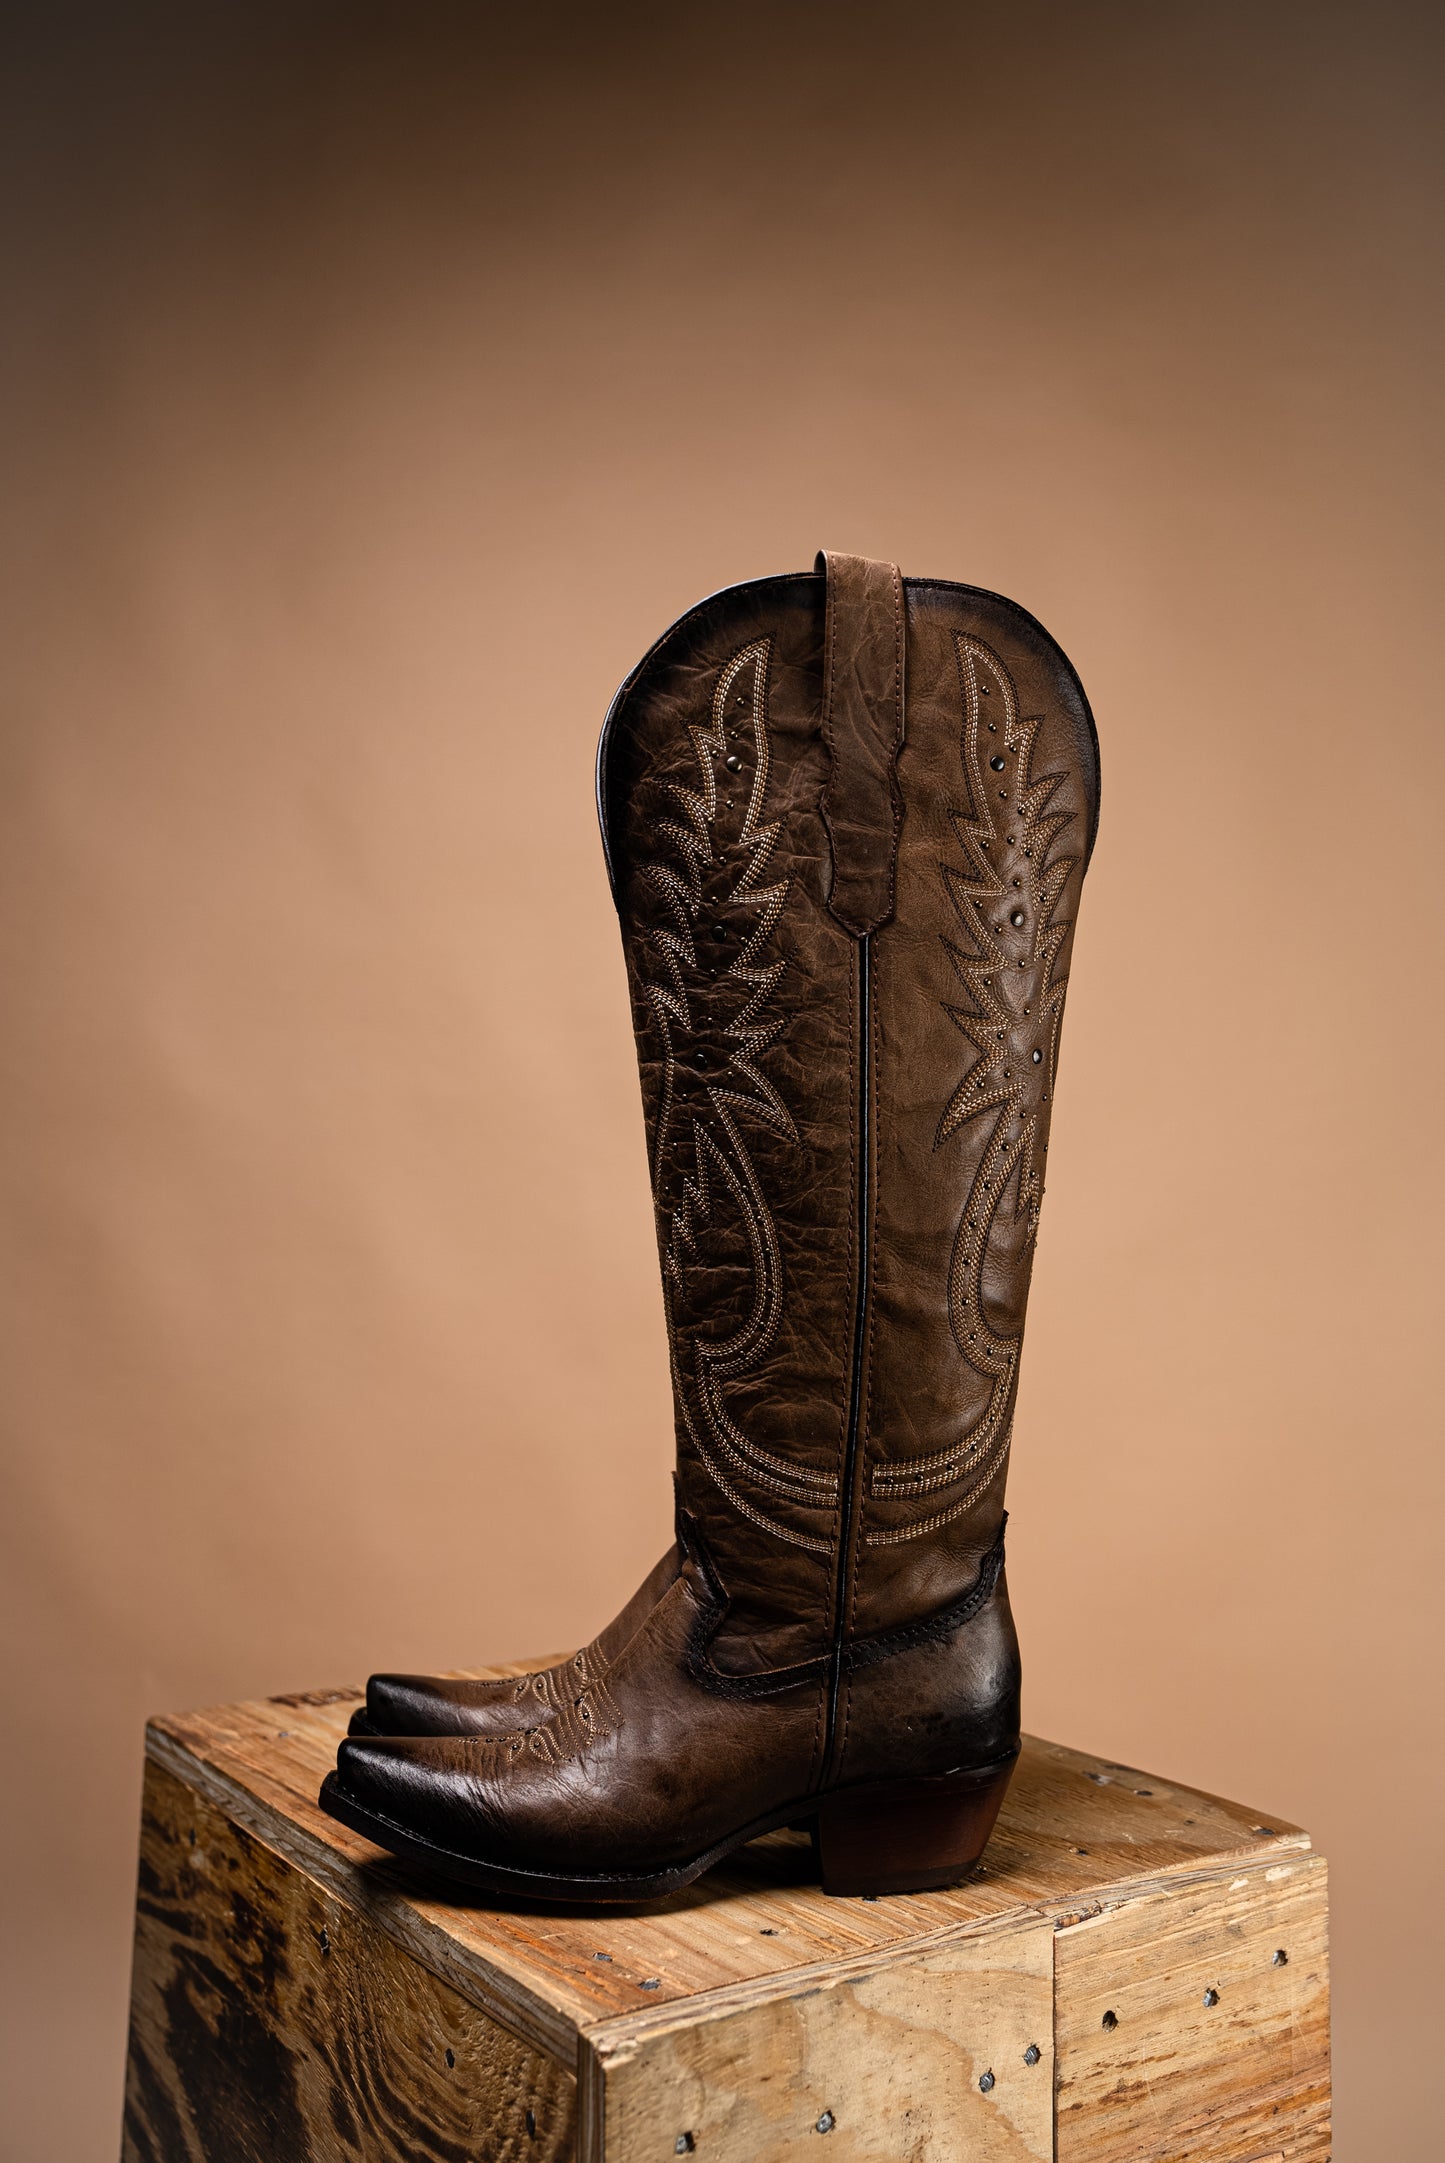 The Kayla Cedro Camel C/Estoperol Tall Wide Calf Friendly Cowgirl Boot